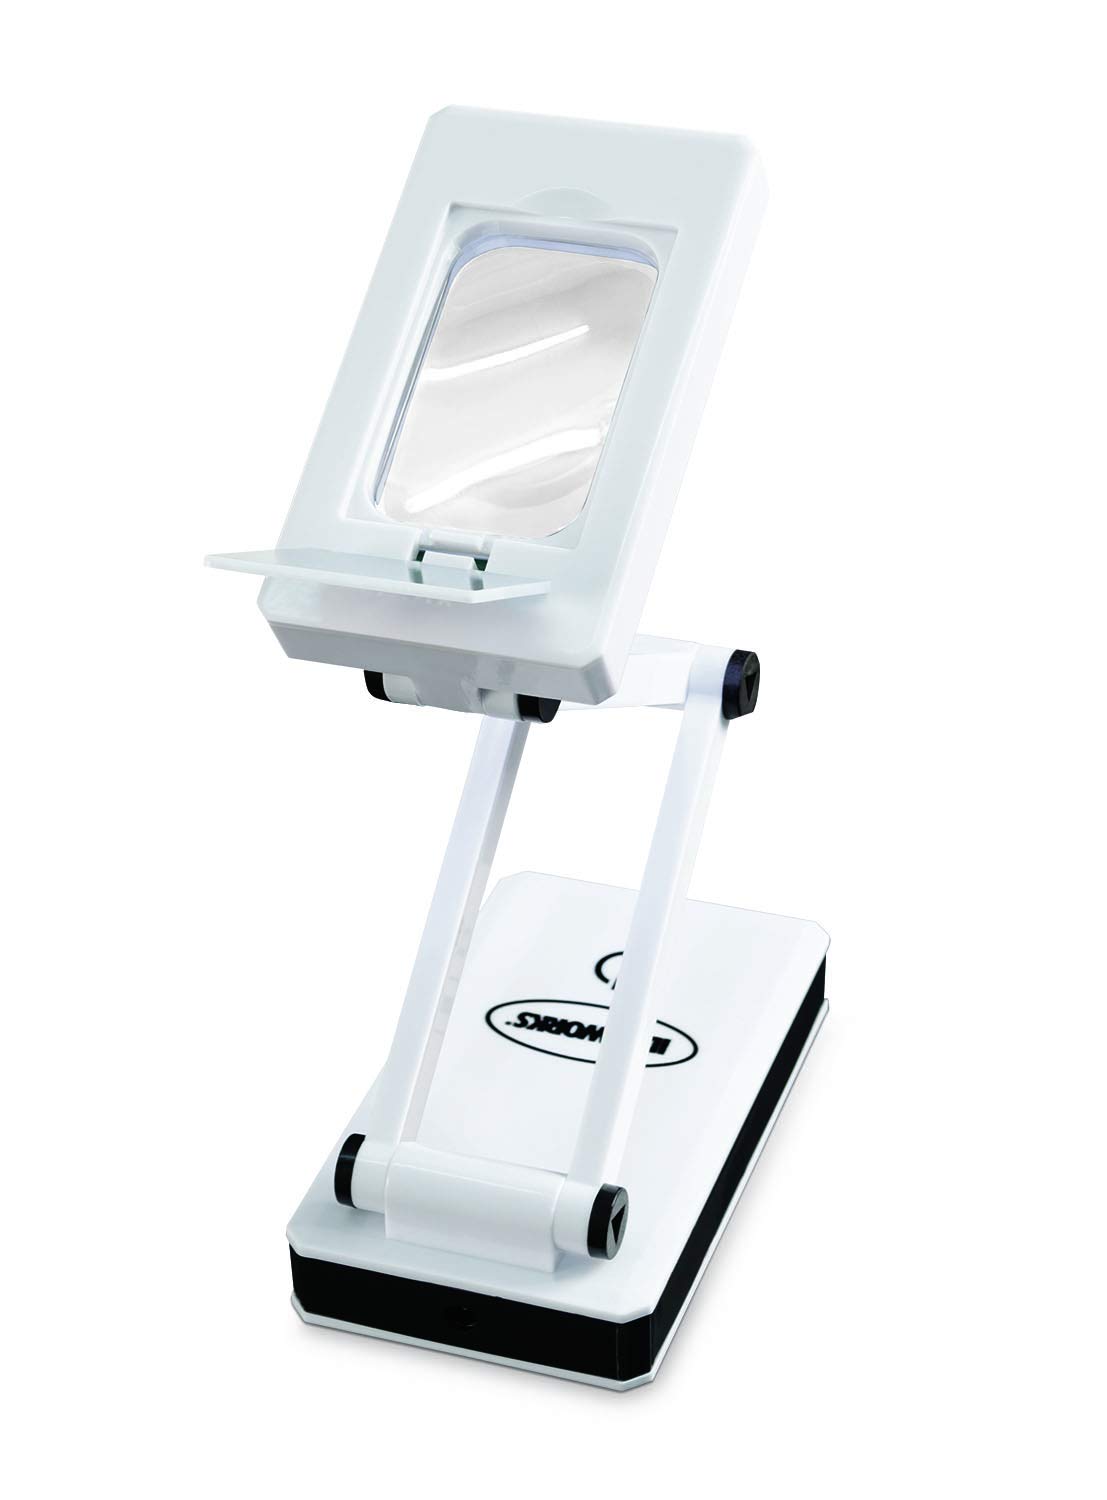 IdeaWorks JR7911 LED Desk Lamp, White with Magnifying Glass